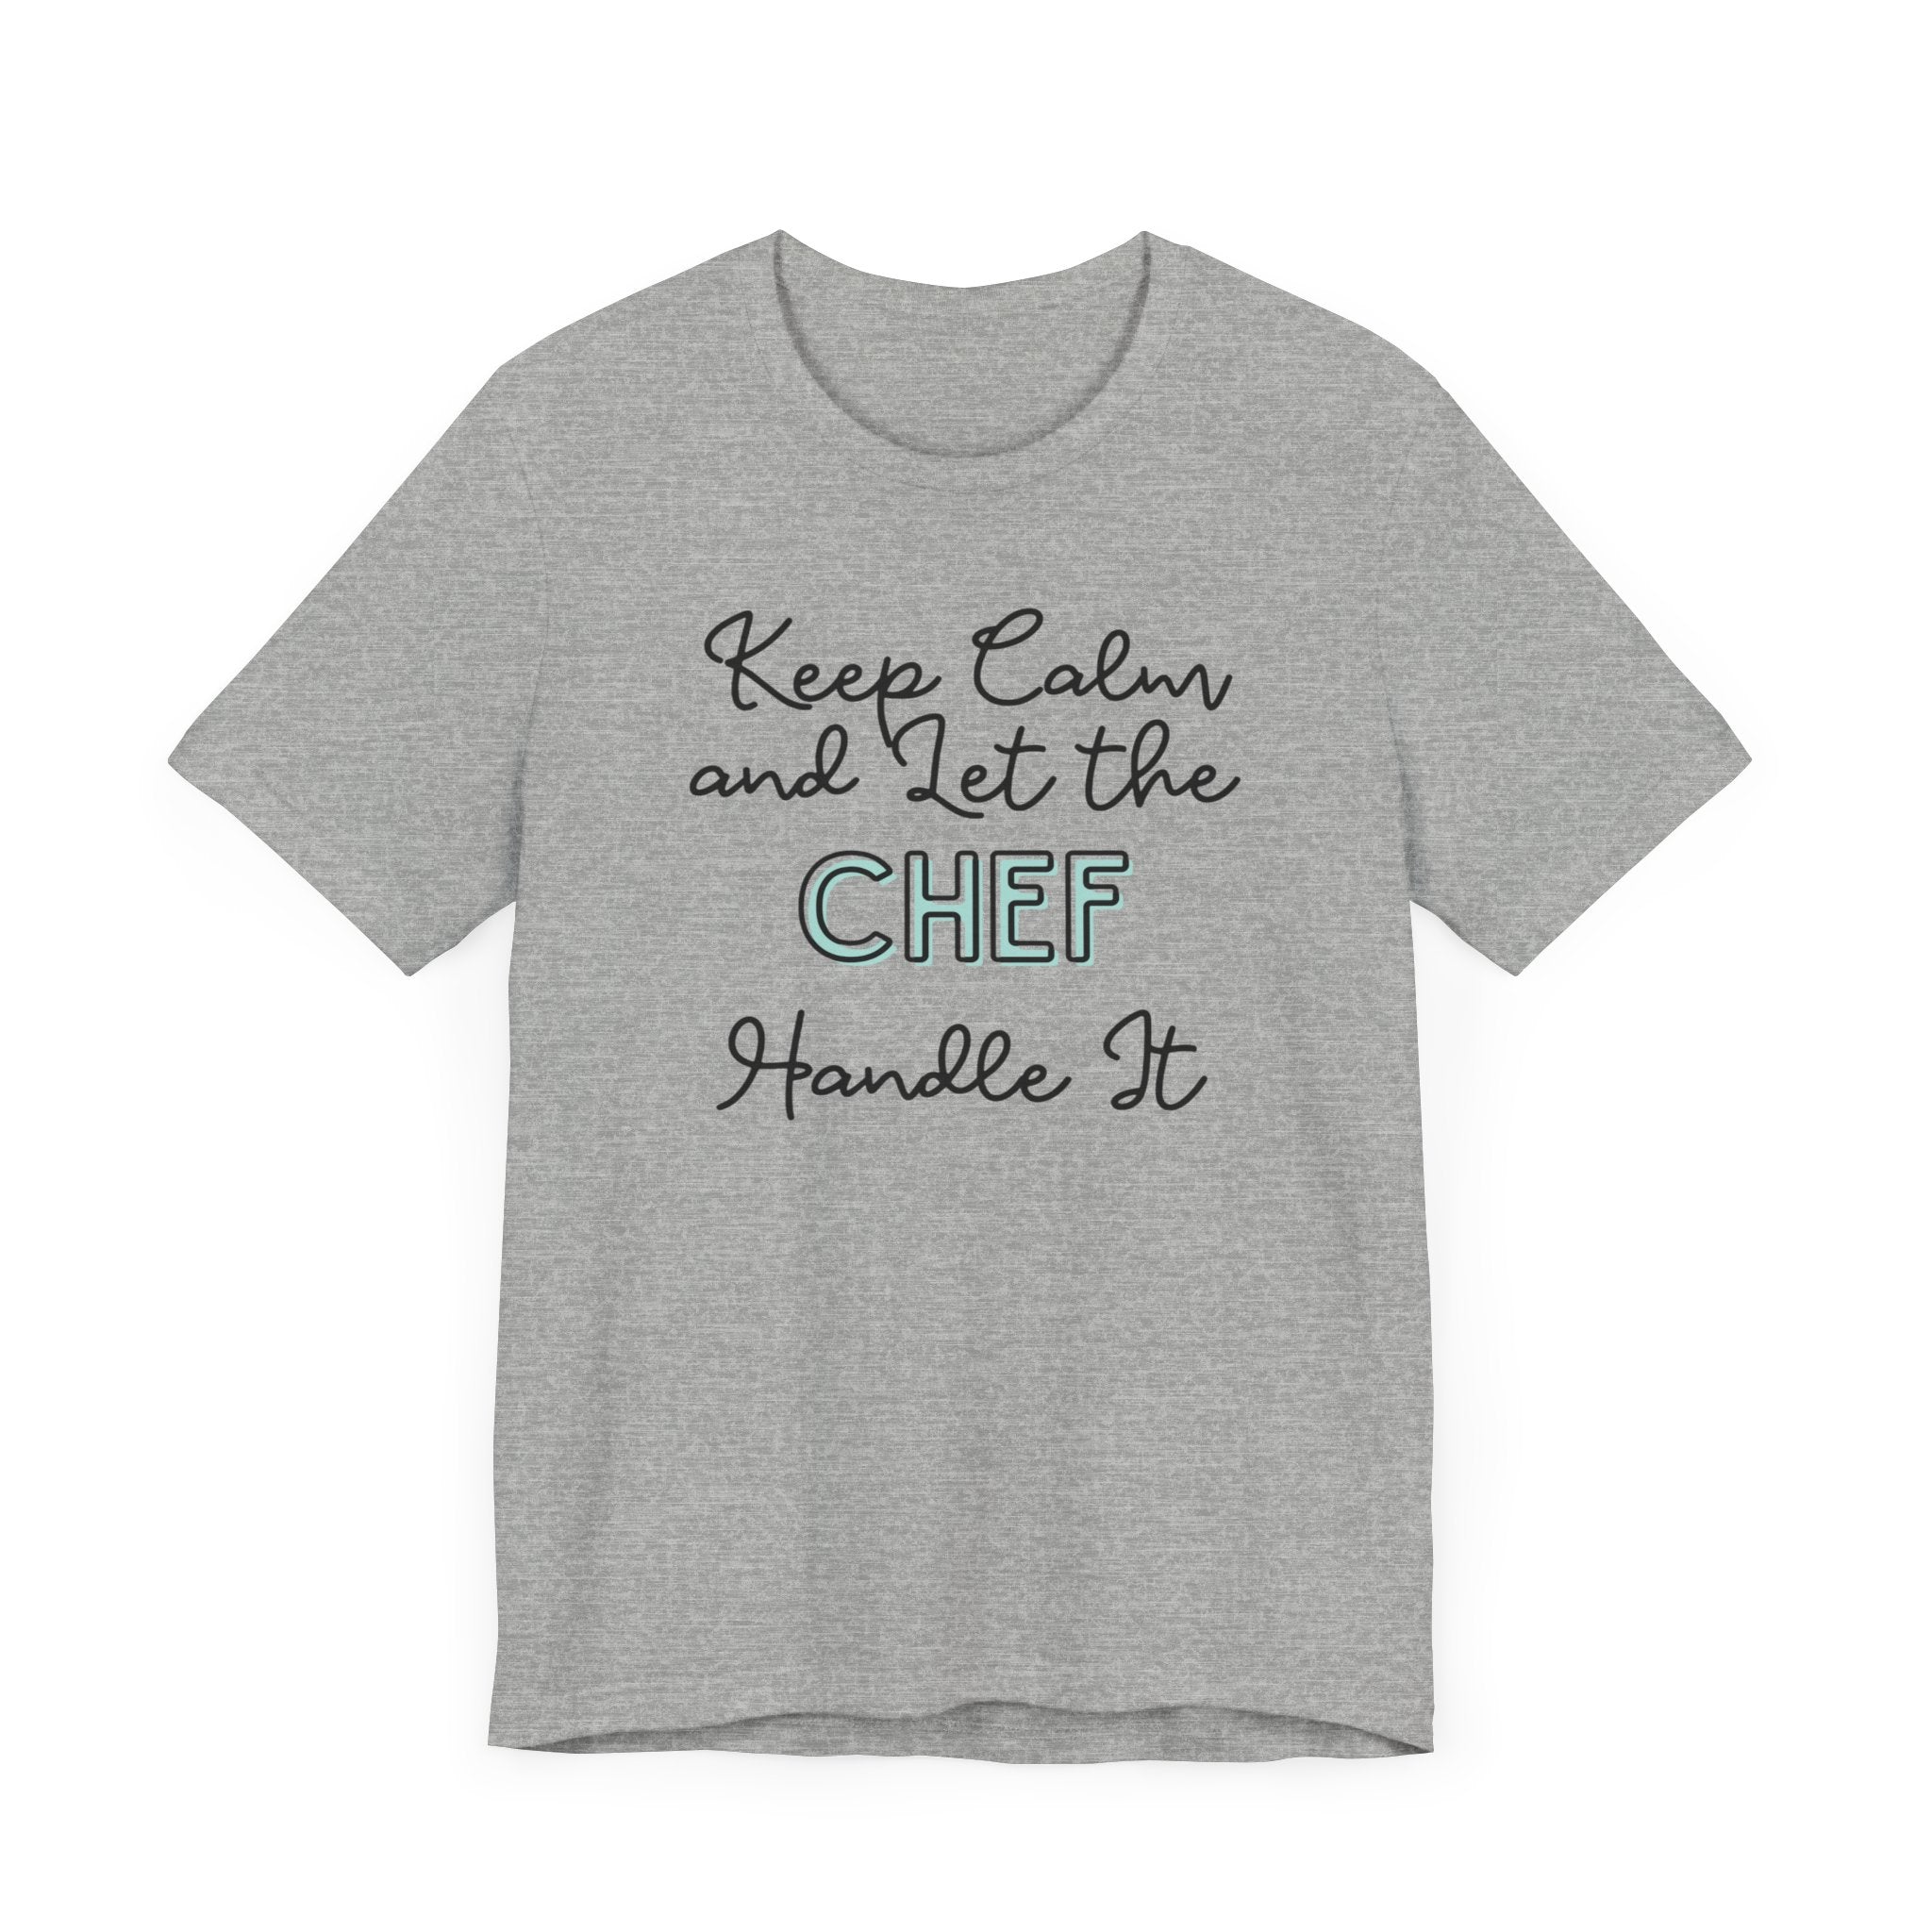 Keep Calm and let the Chef handle It - Jersey Short Sleeve Tee